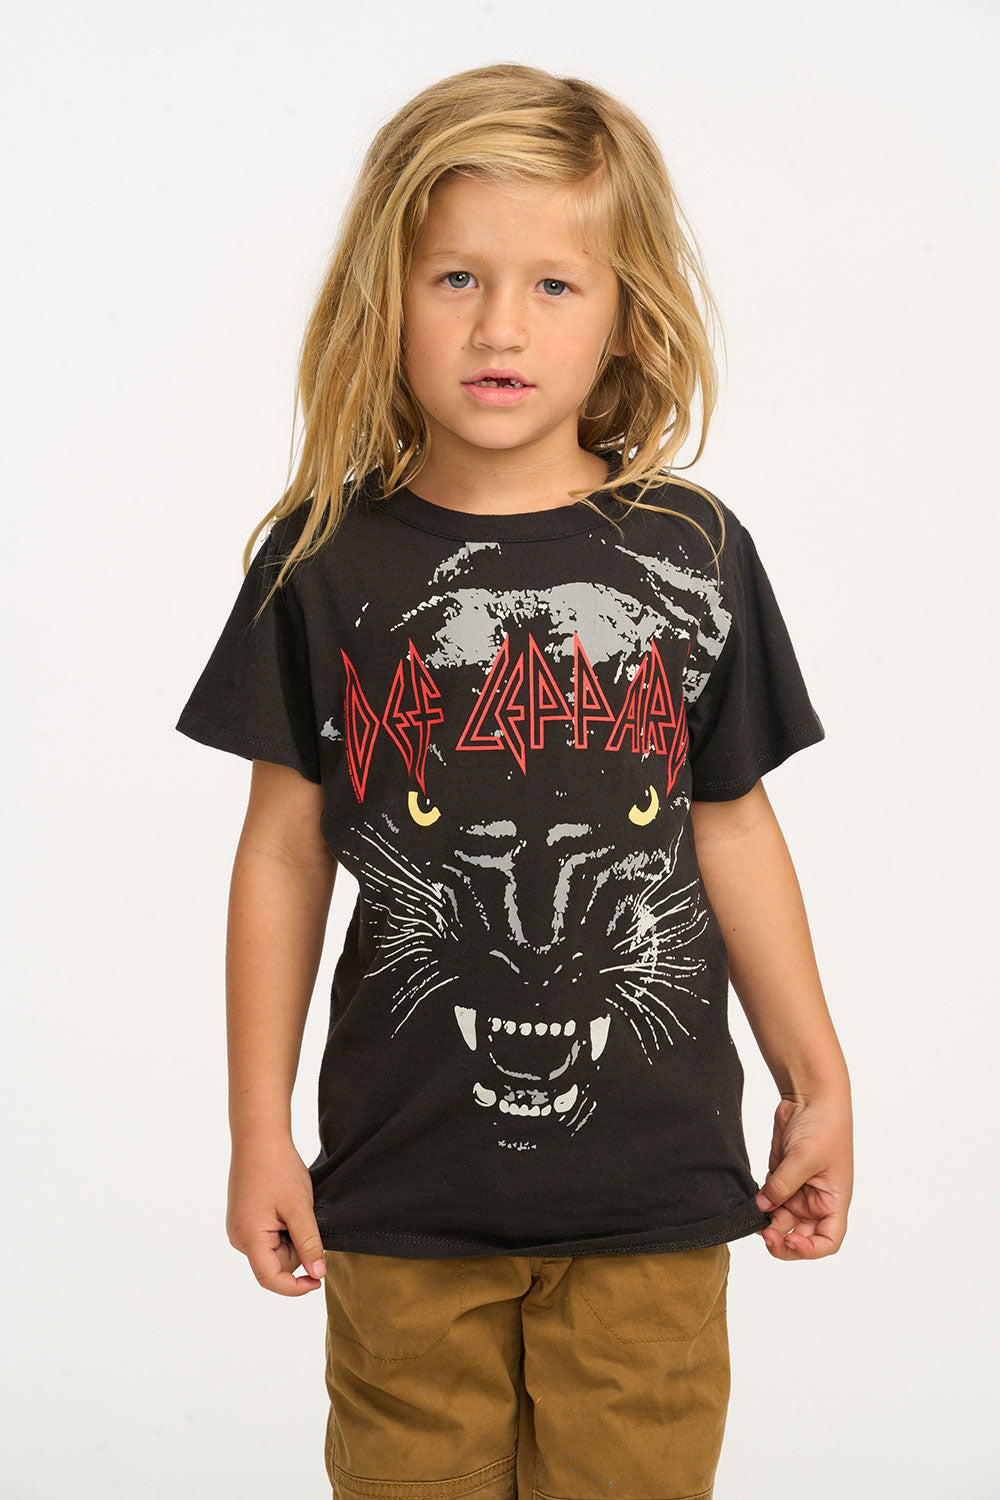 Def Leppard Leopard Tee BOYS chaserbrand